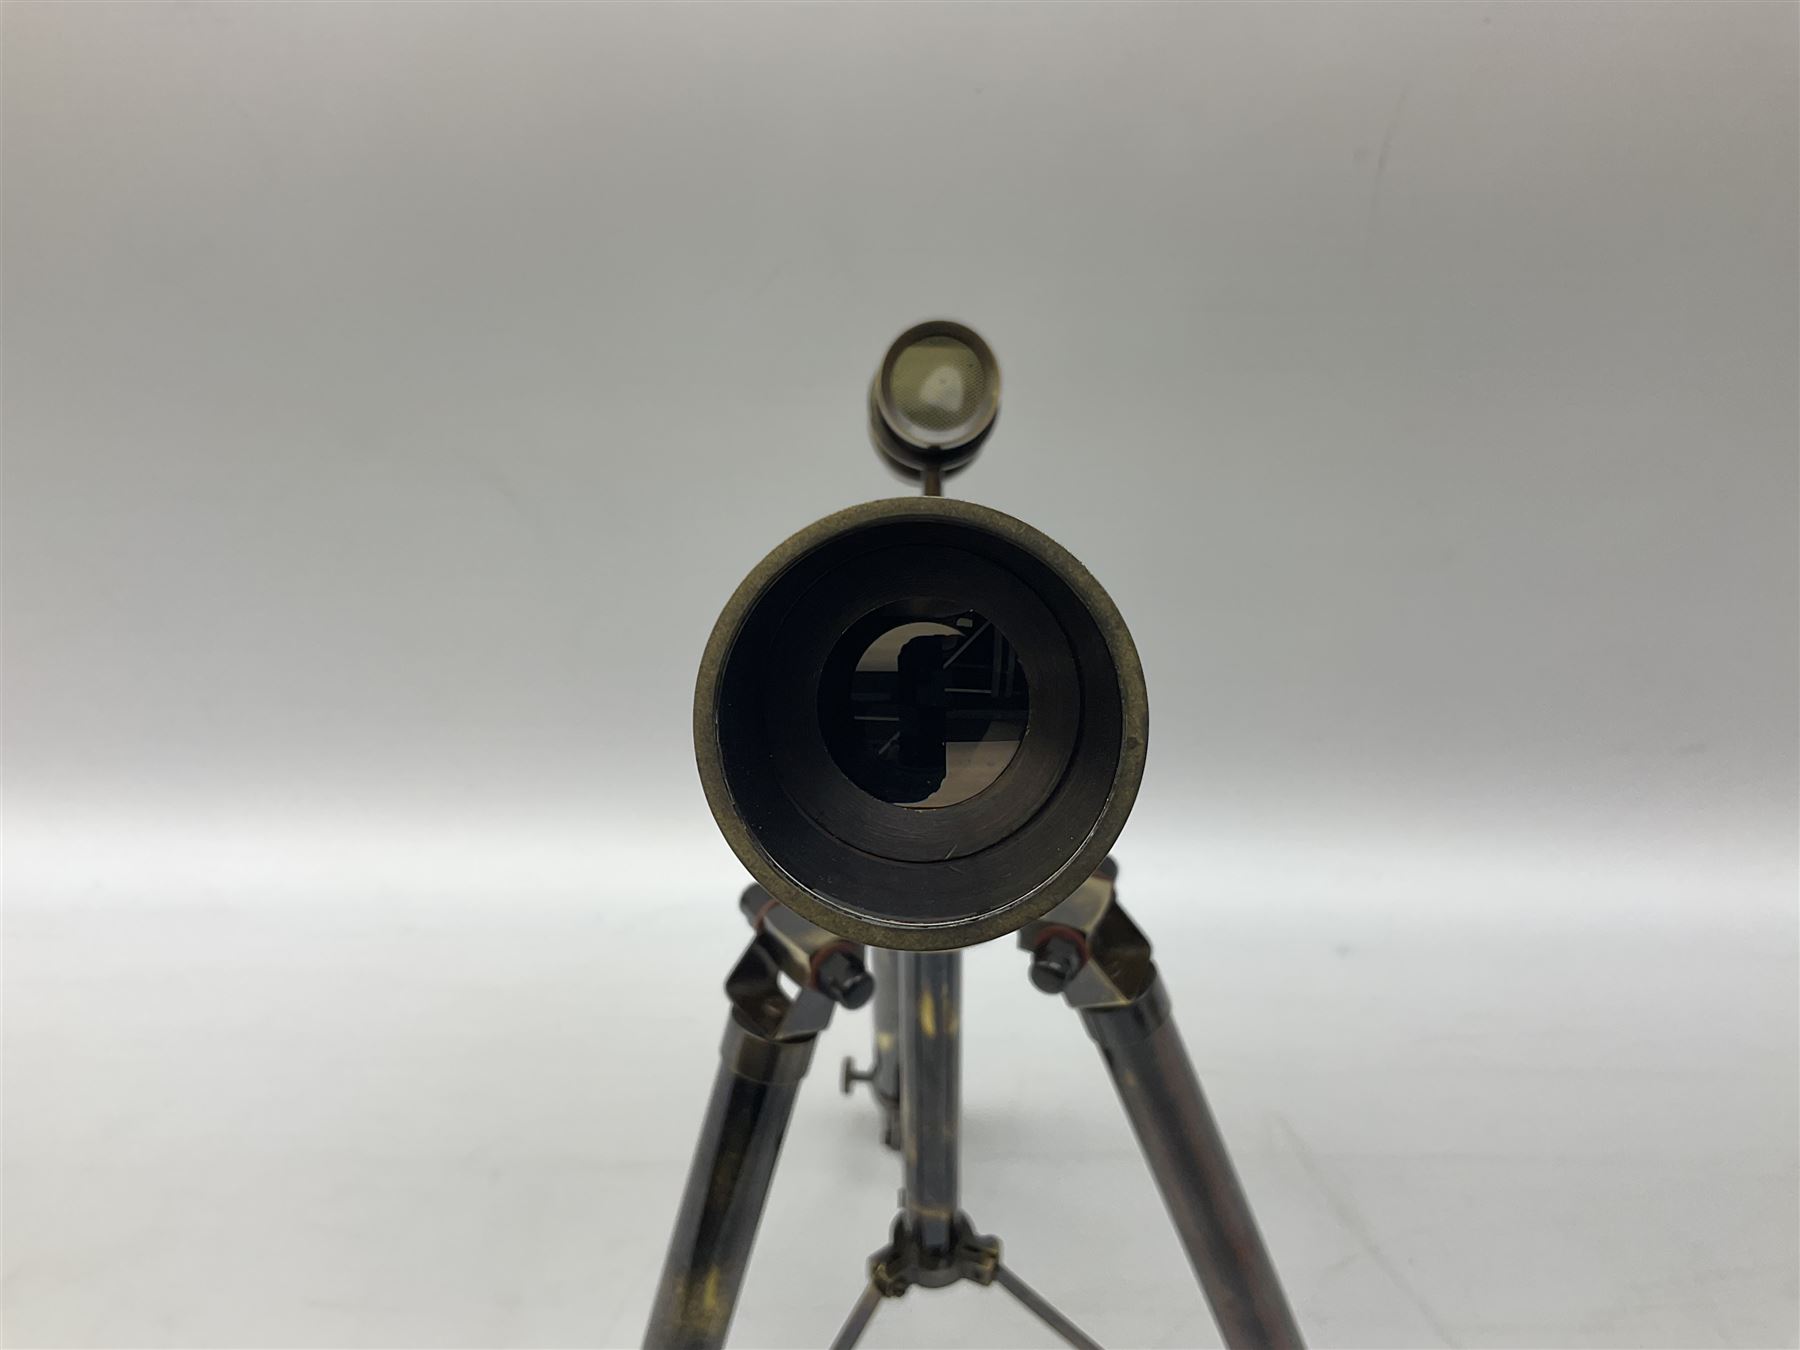 Reproduction brasses telescope on tripod stand with plaque detailed 'Kelvin & Hughes London 1917' - Image 7 of 8